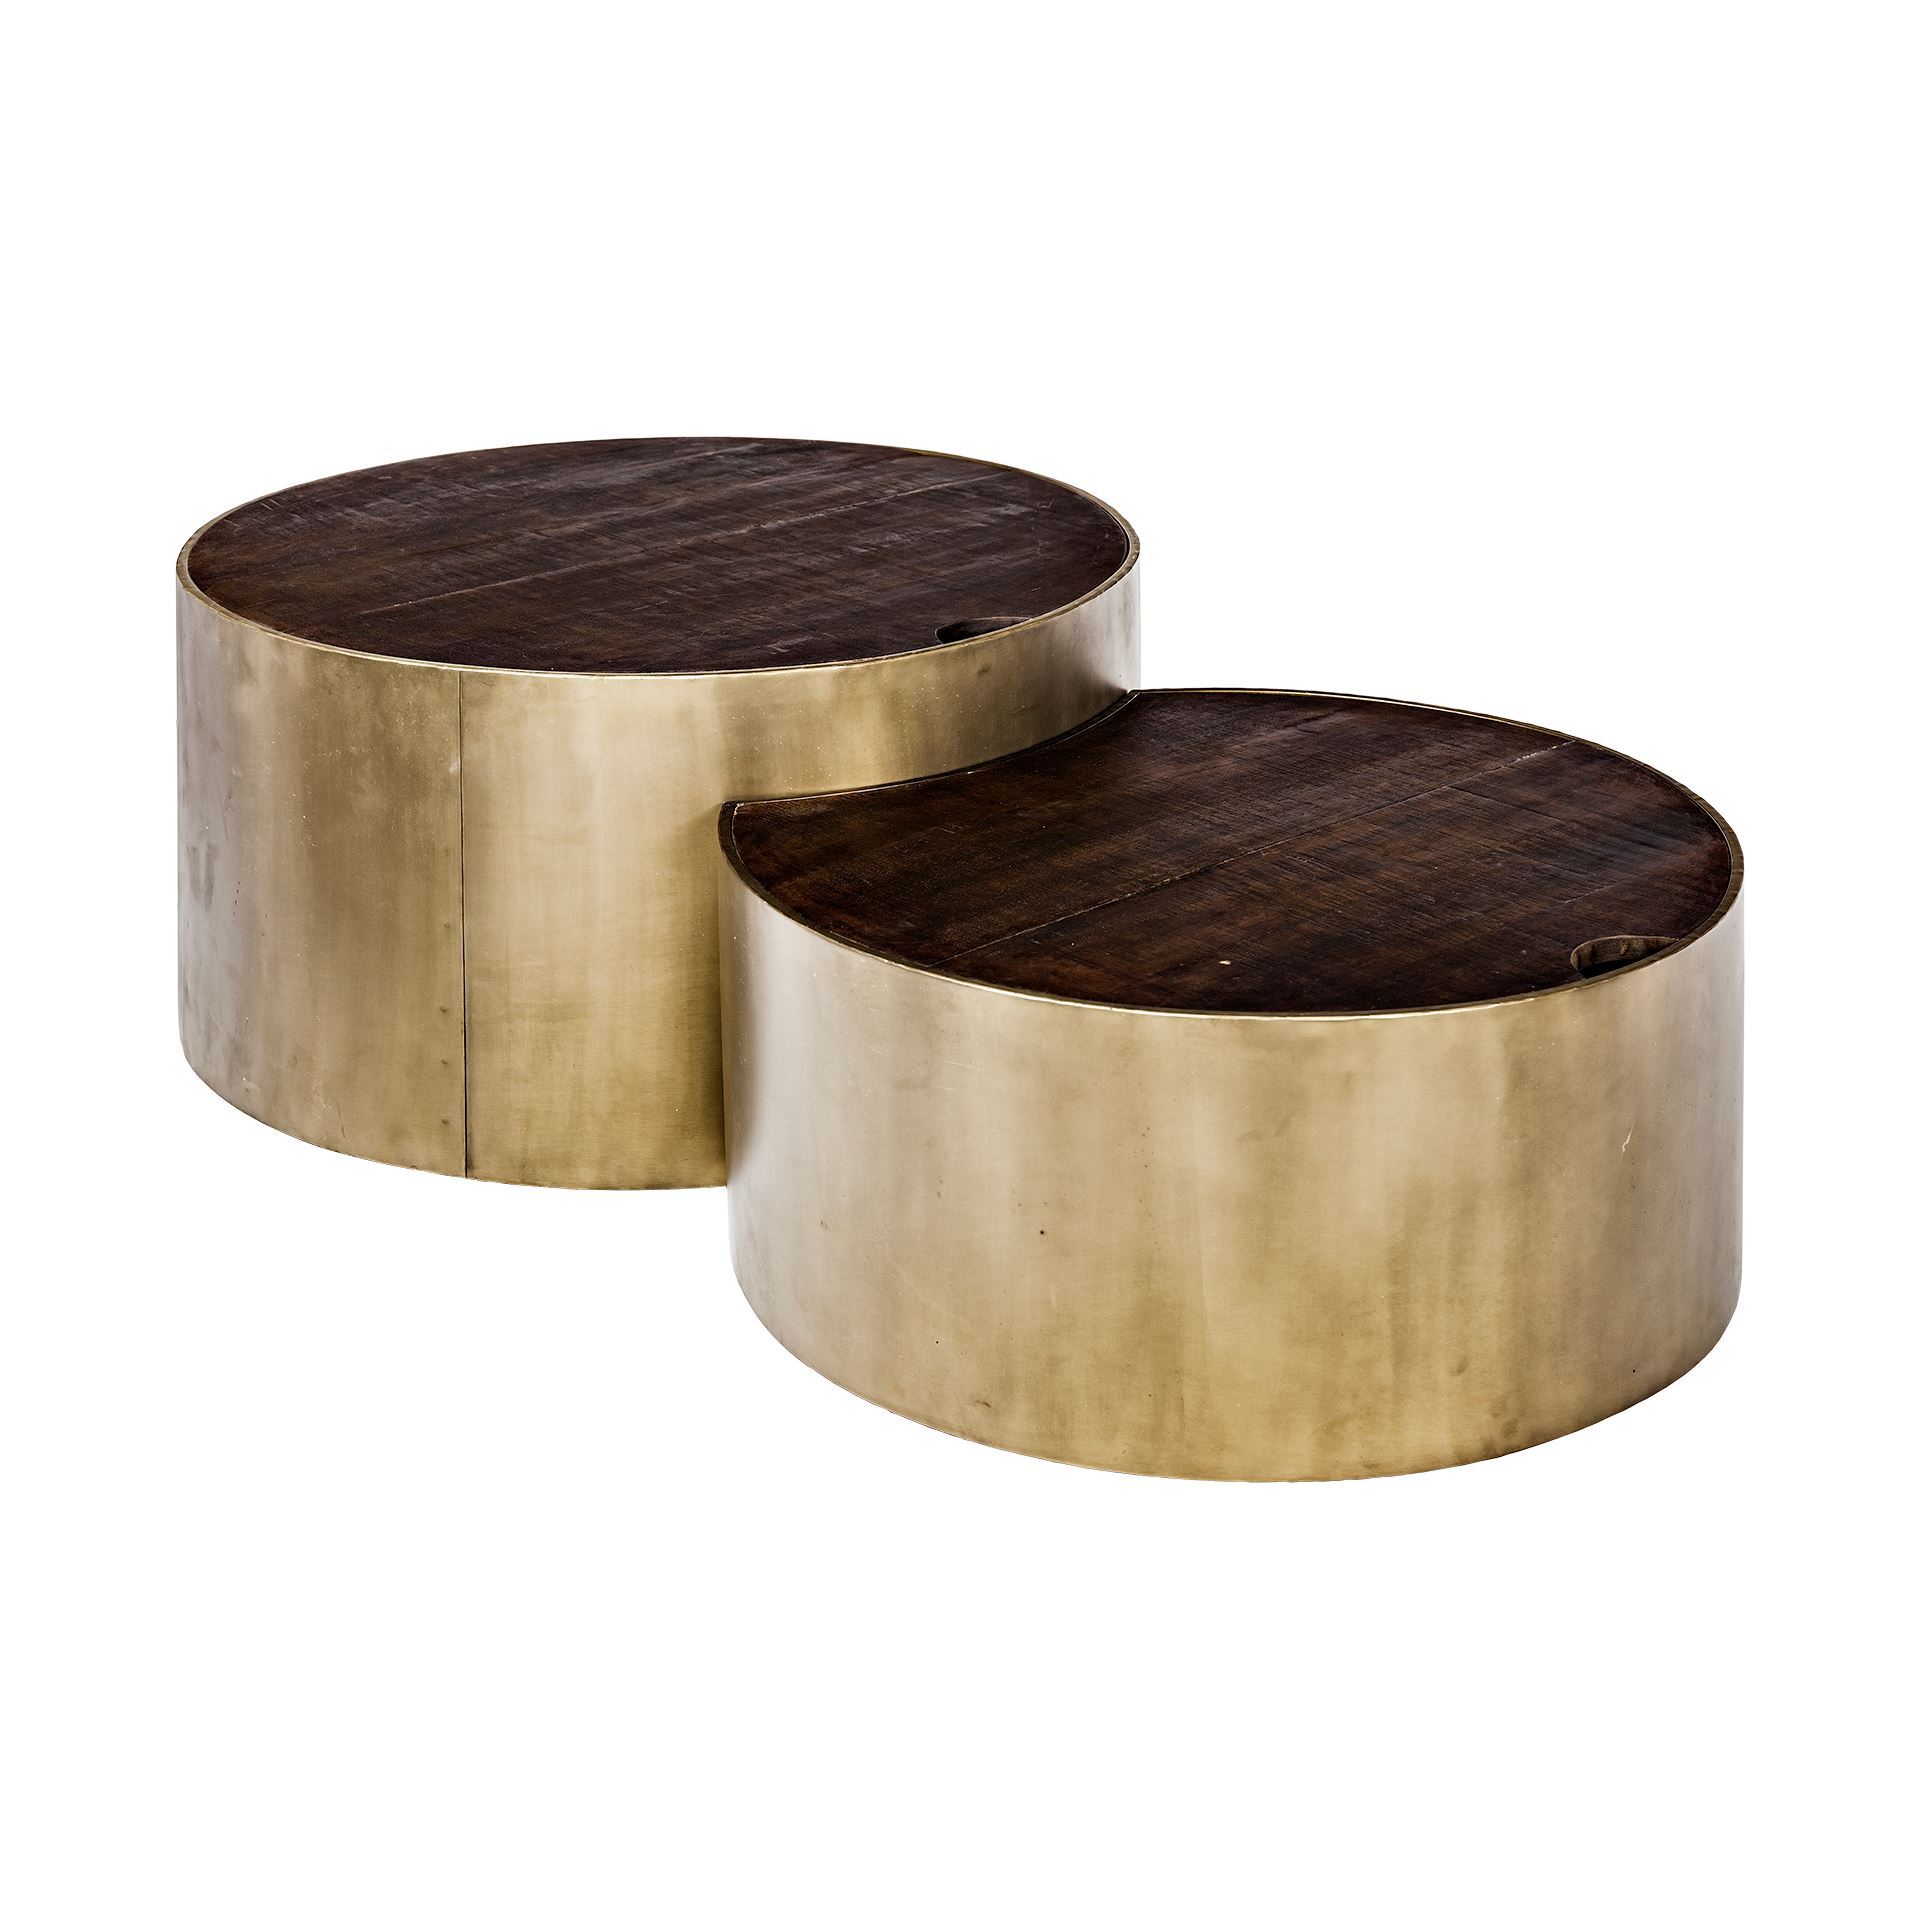 S/2 39.5" & 31.25" Round Wood Nesting Coffee Tables